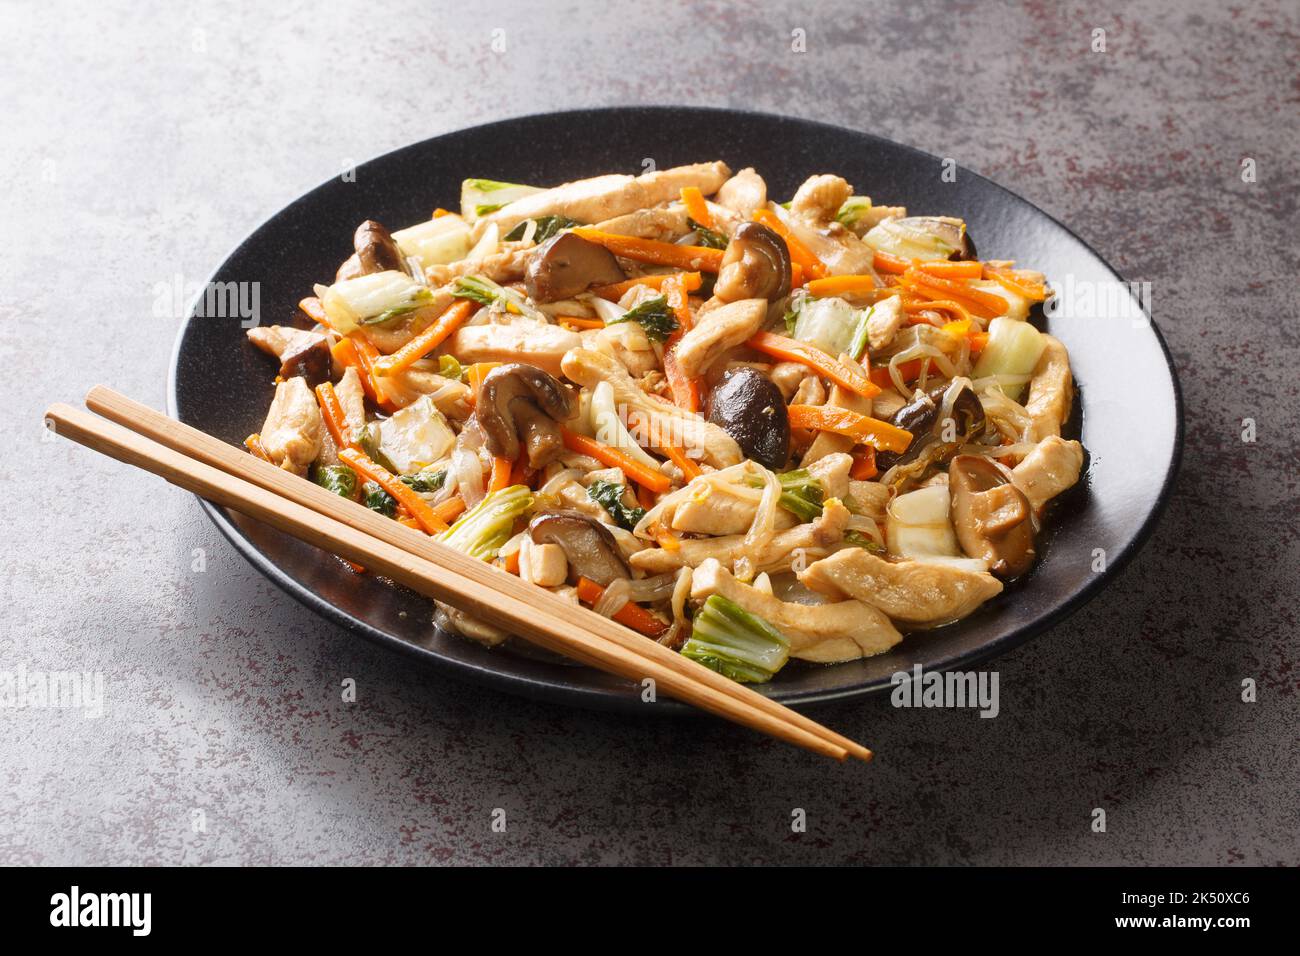 Delicious stir-fry of tender chicken and crunchy vegetables, chop suey close-up in a plate on the table. Horizontal Stock Photo